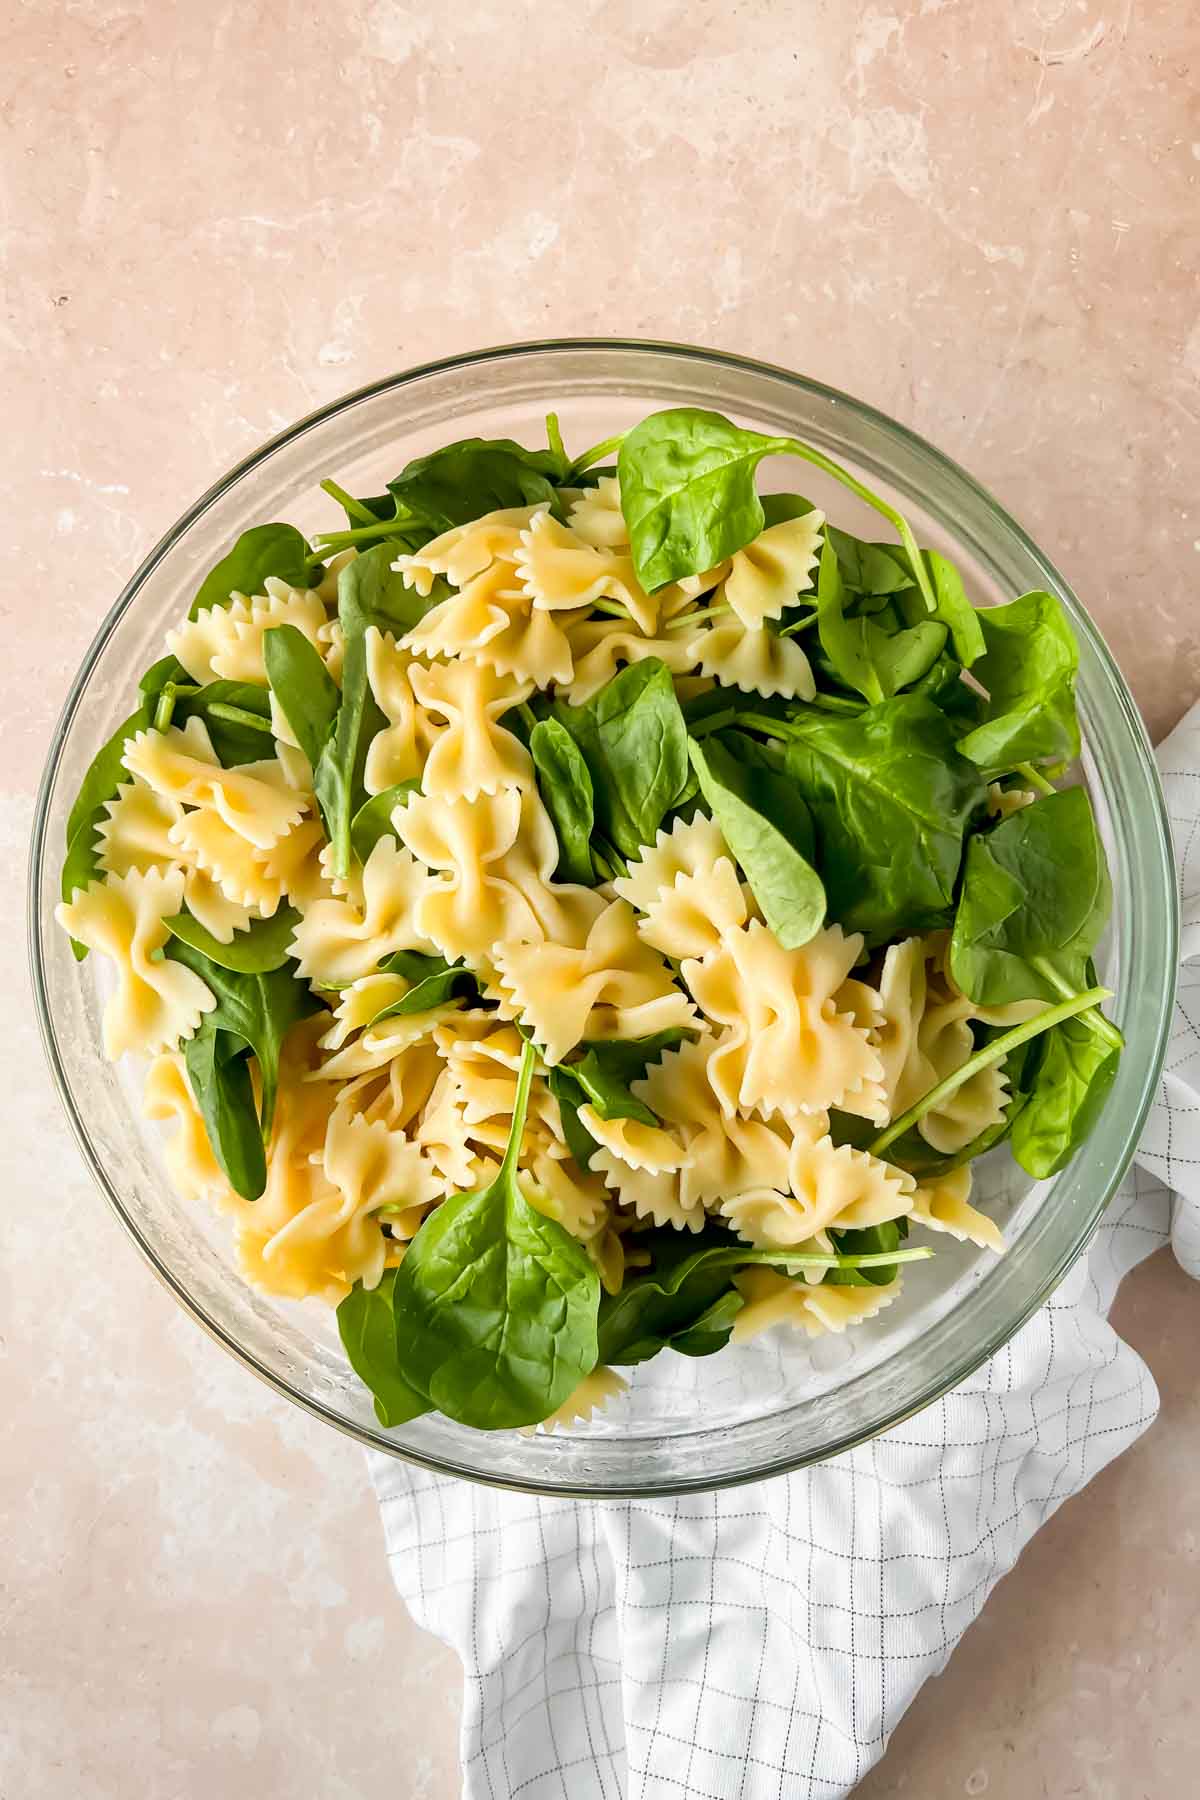 bowtie noodles and spinach in glass mixing bowl.